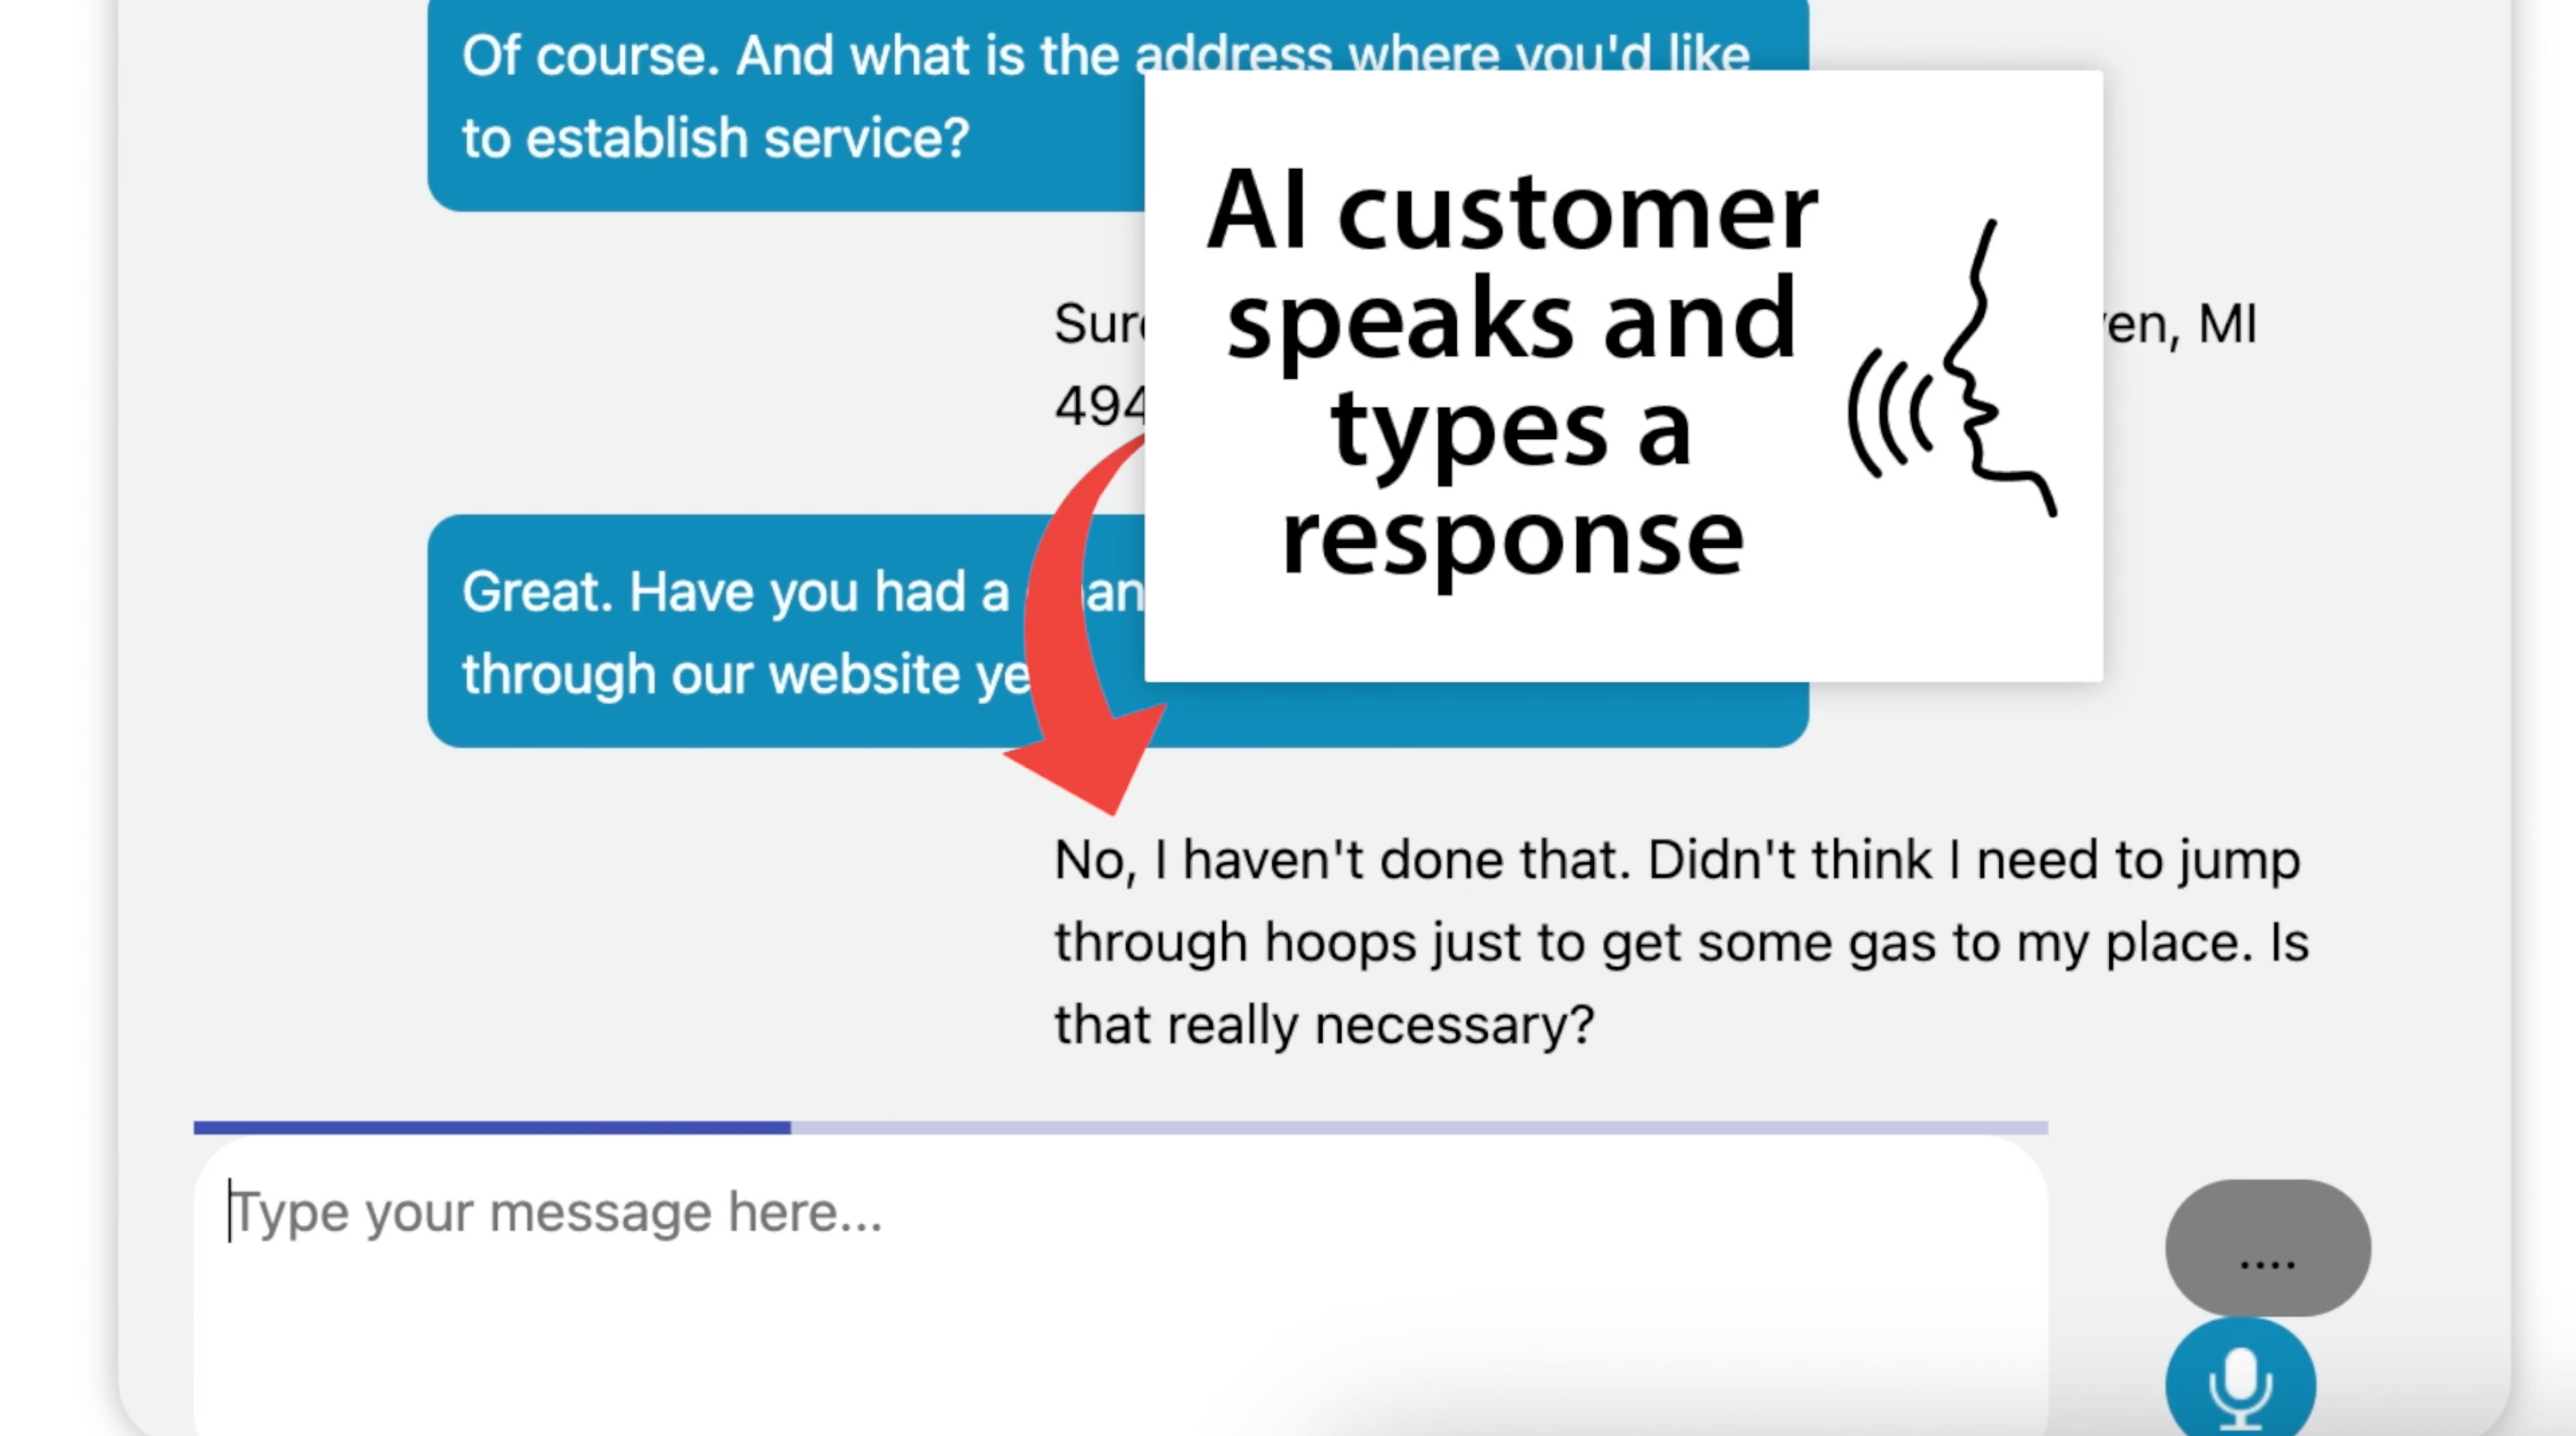 The AI customer speaks and types a response.